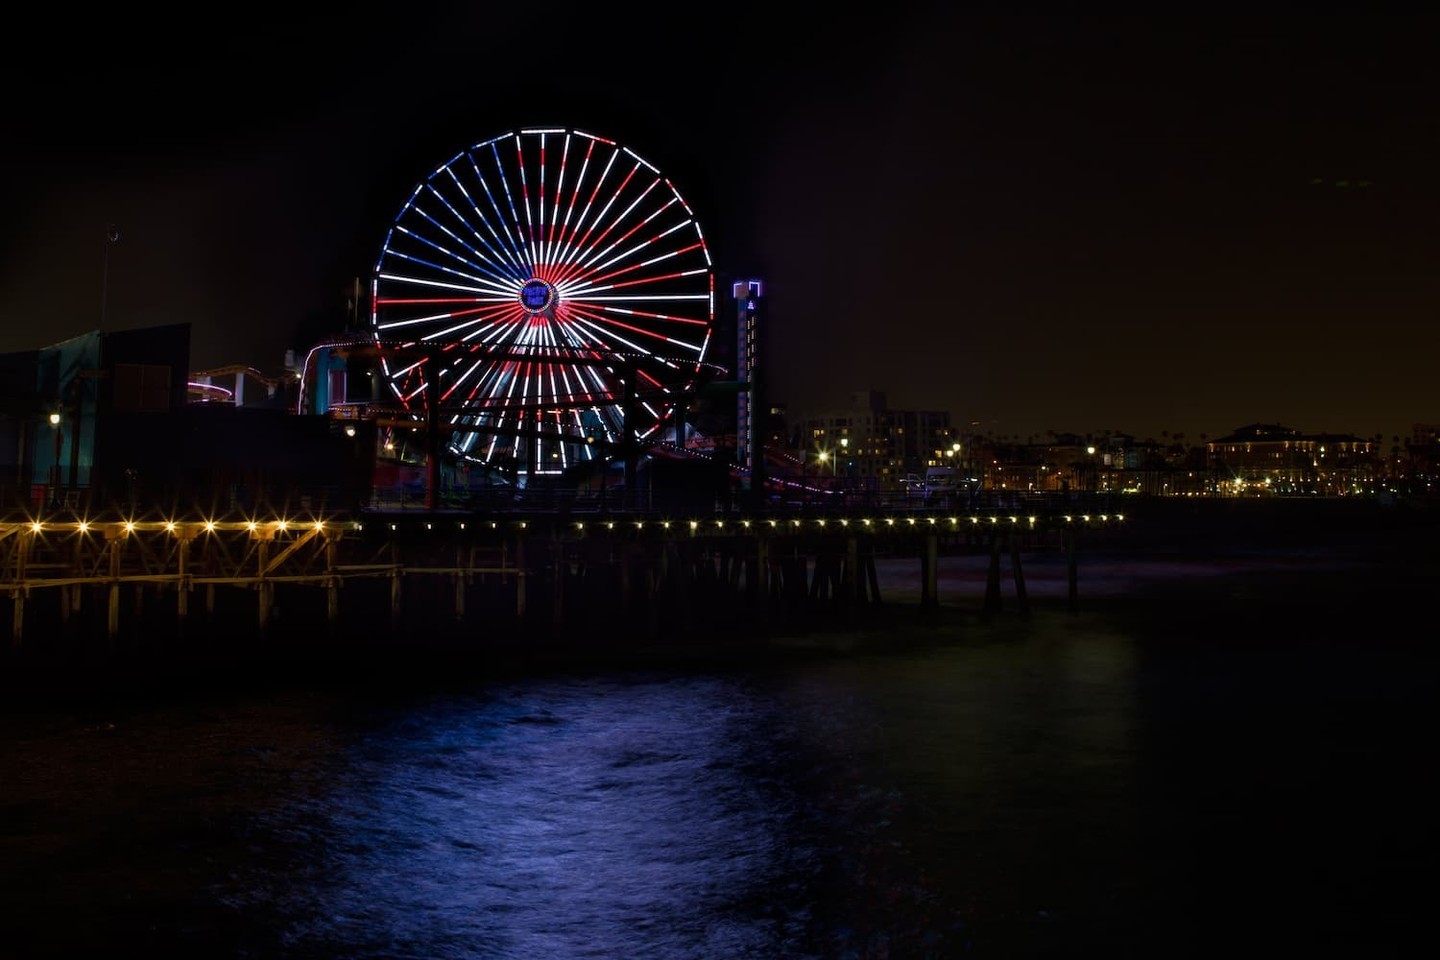 The Santa Monica Pier Ferris Wheel will be lit red, white, and blue on Tuesday, June 14 to in observance of Flag Day. 🇺🇸  This special lighting event will take place on the evening of Tuesday, June 14. Enjoy watching the light program online at www.pacpark.com/live.🎡
.
.
.
#santamonica #santamonicapier #santamonicabeach #pacpark #pacificpark #wheellighting #pacificwheel #wheellighting #pacificwheel